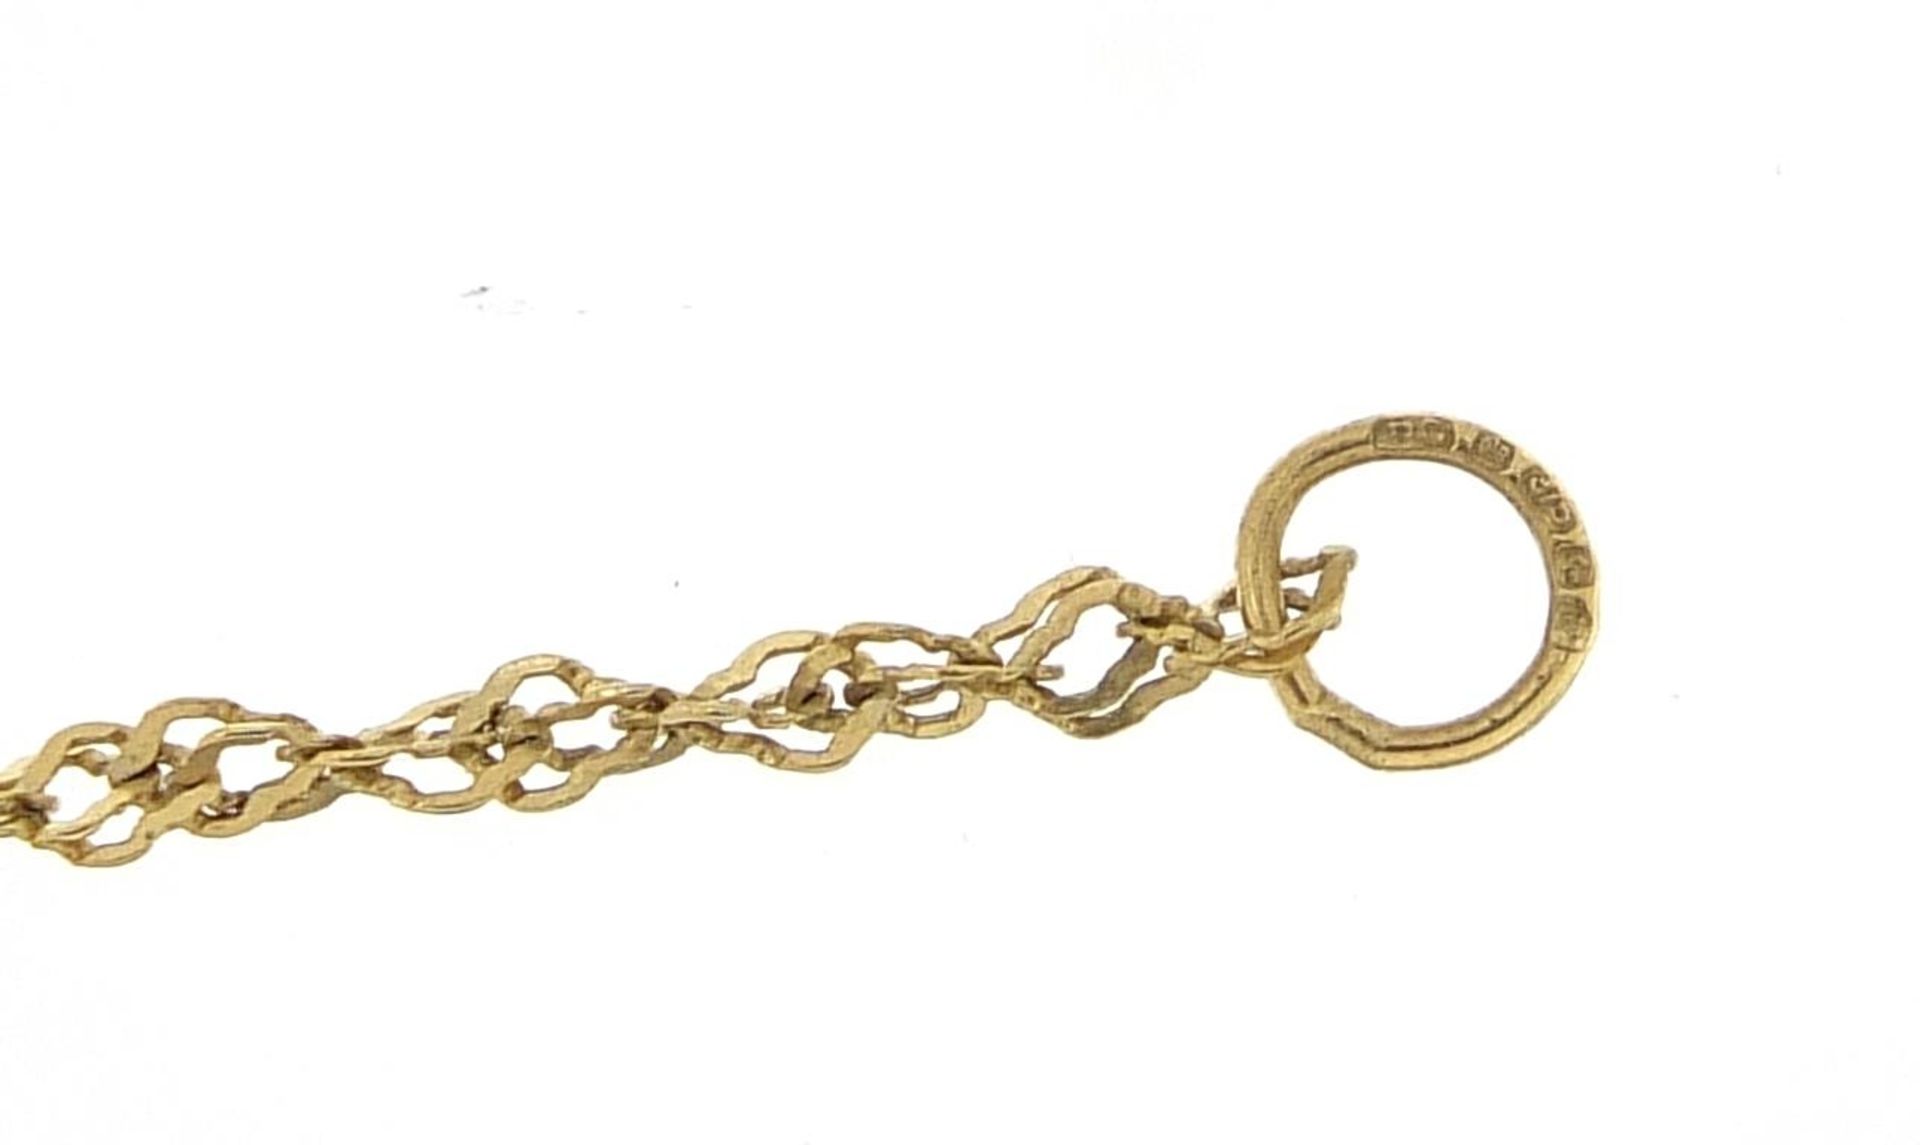 9ct gold rope twist necklace, 39cm in length, 1.3g - this lot is sold without buyer's premium - Image 3 of 3